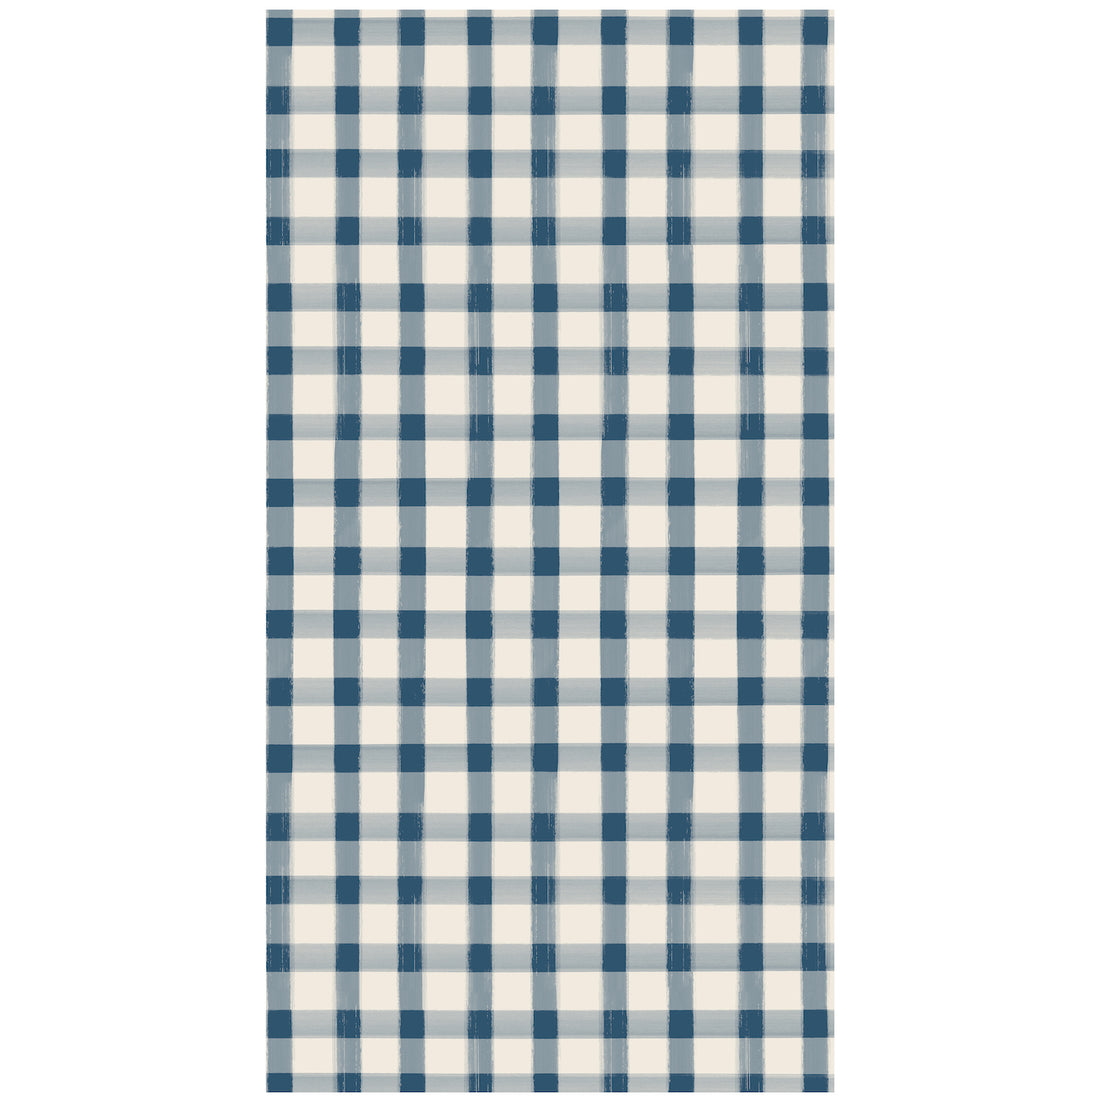 A rectangle guest napkin featuring painted gingham grid check pattern made of light blue lines intersecting at blue squares, on a white background.